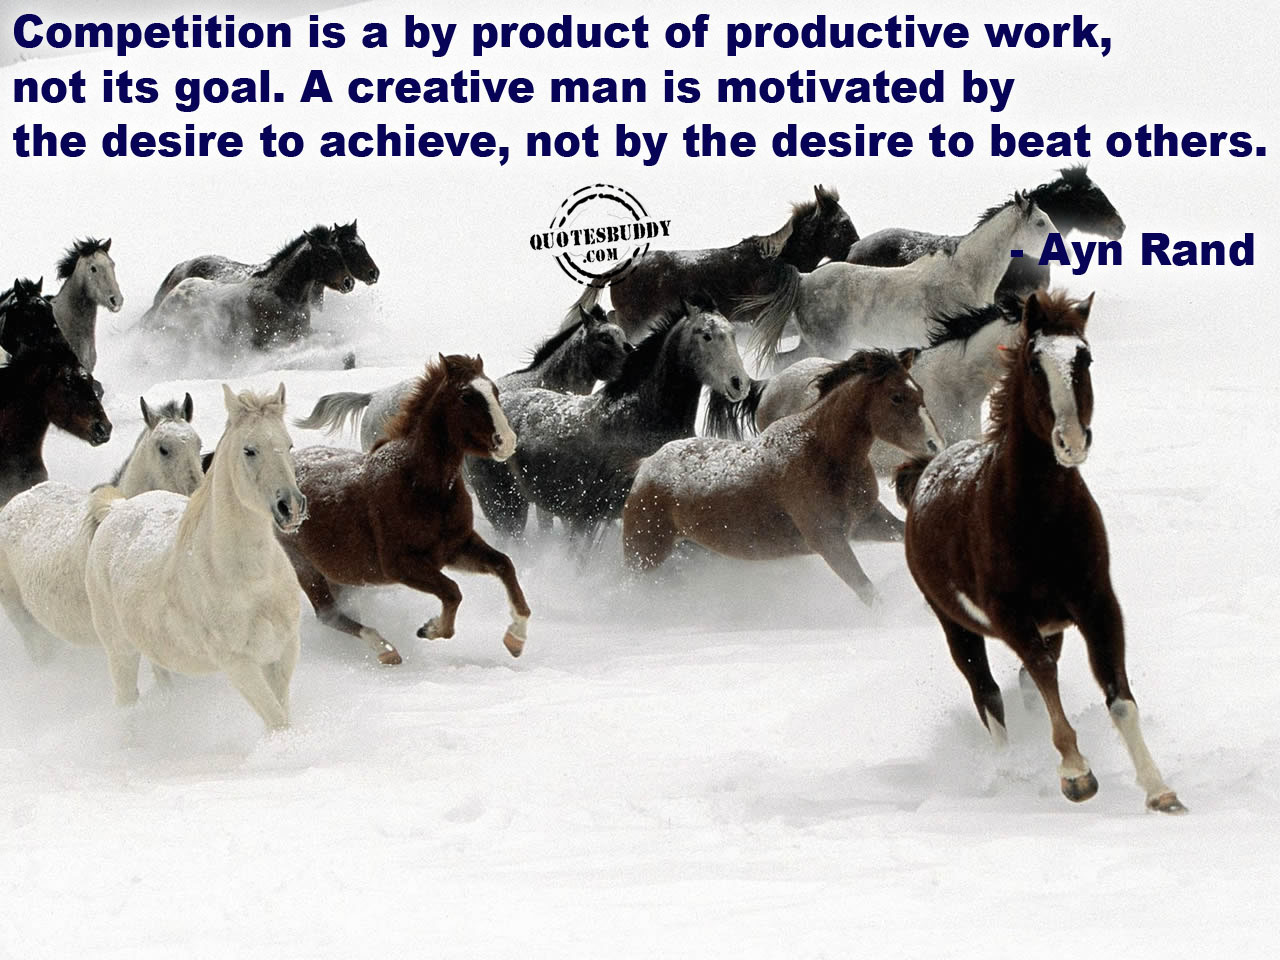 Competition is a by-product of productive work, not its goal. A creative man is motivated by the desire to achieve, not by the desire to beat others. Ayn Rand